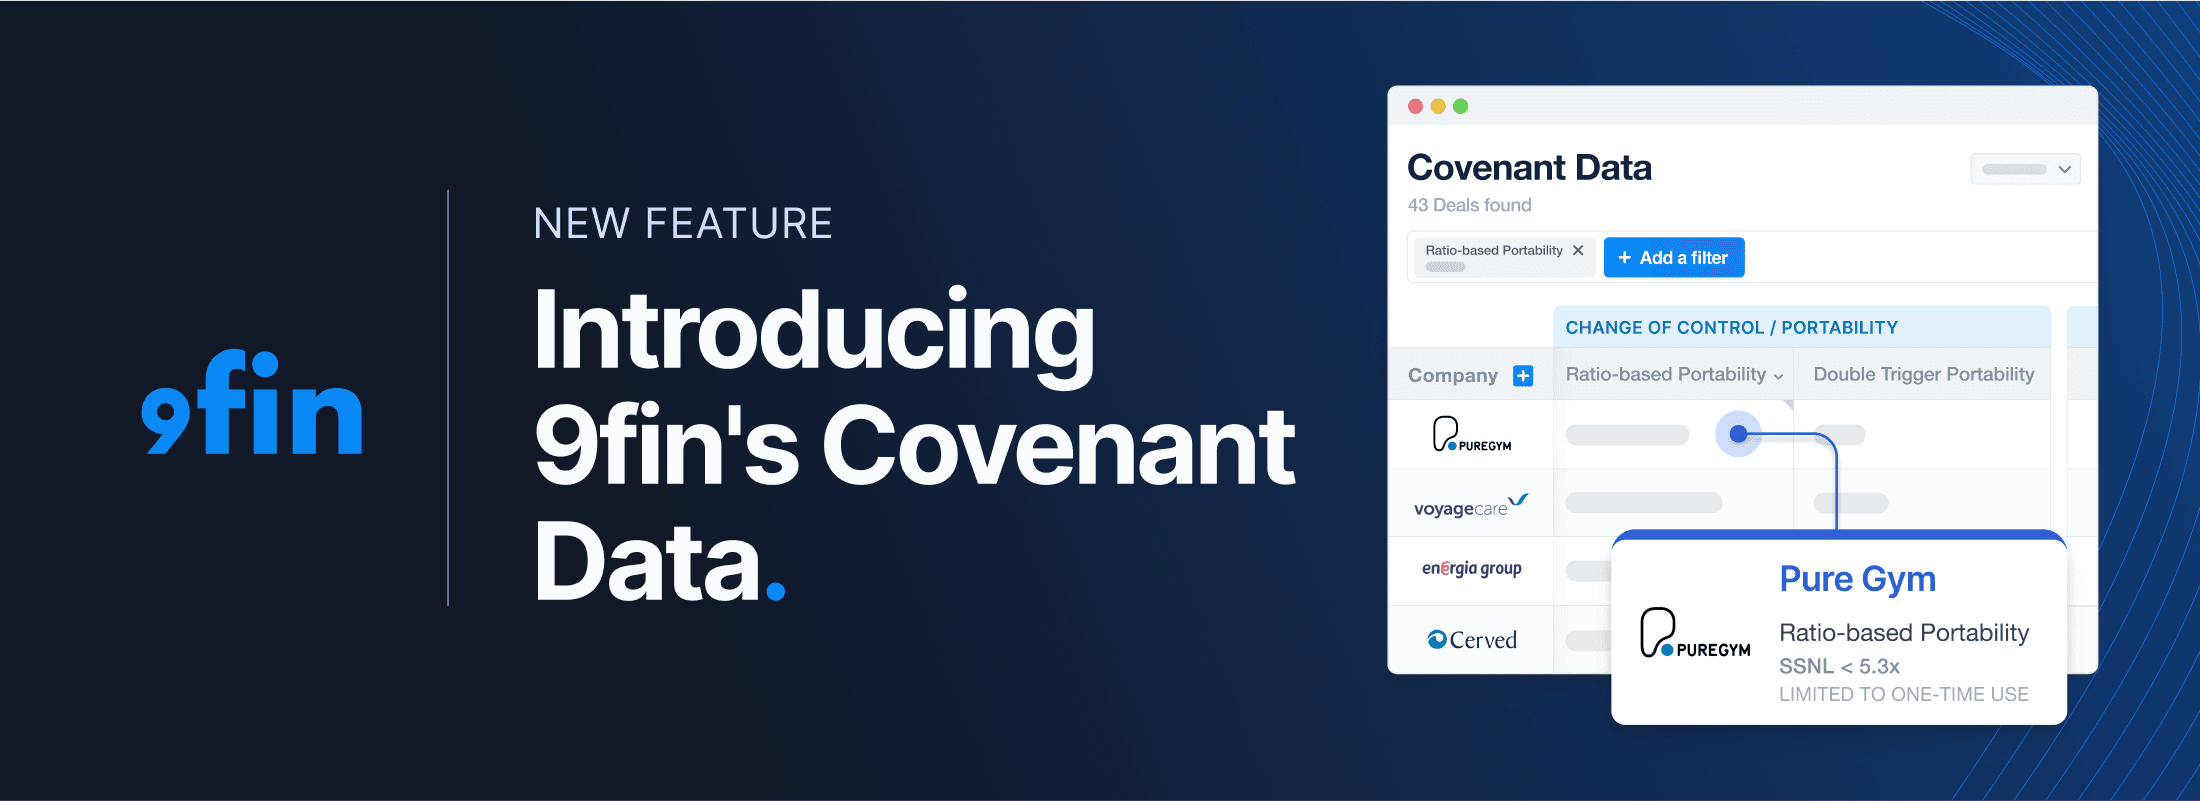 Announcing 9fin’s Covenant Data